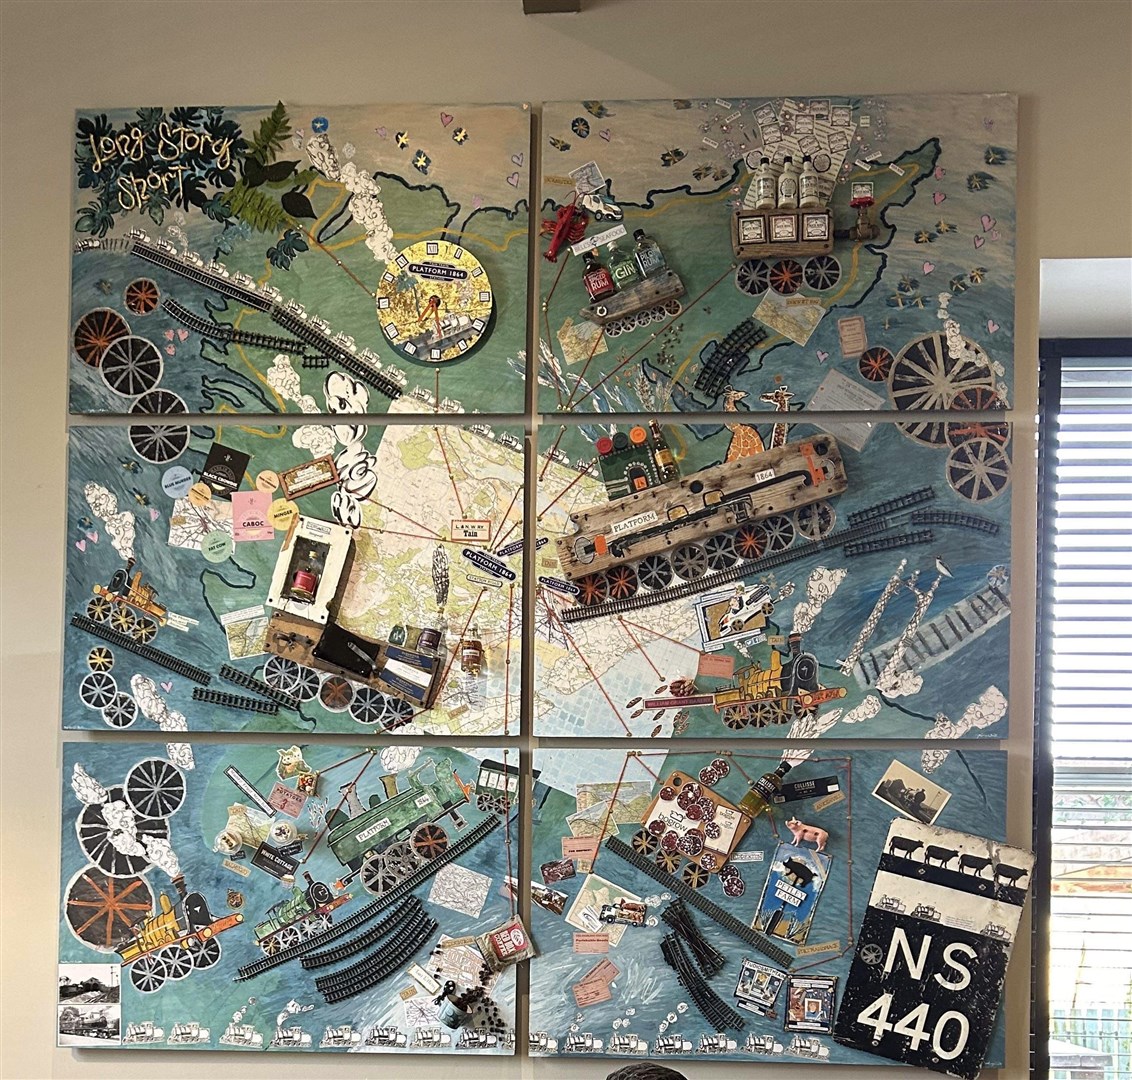 The new mural is made up of six wooden panels, painted and with items attached to represent local businesses.